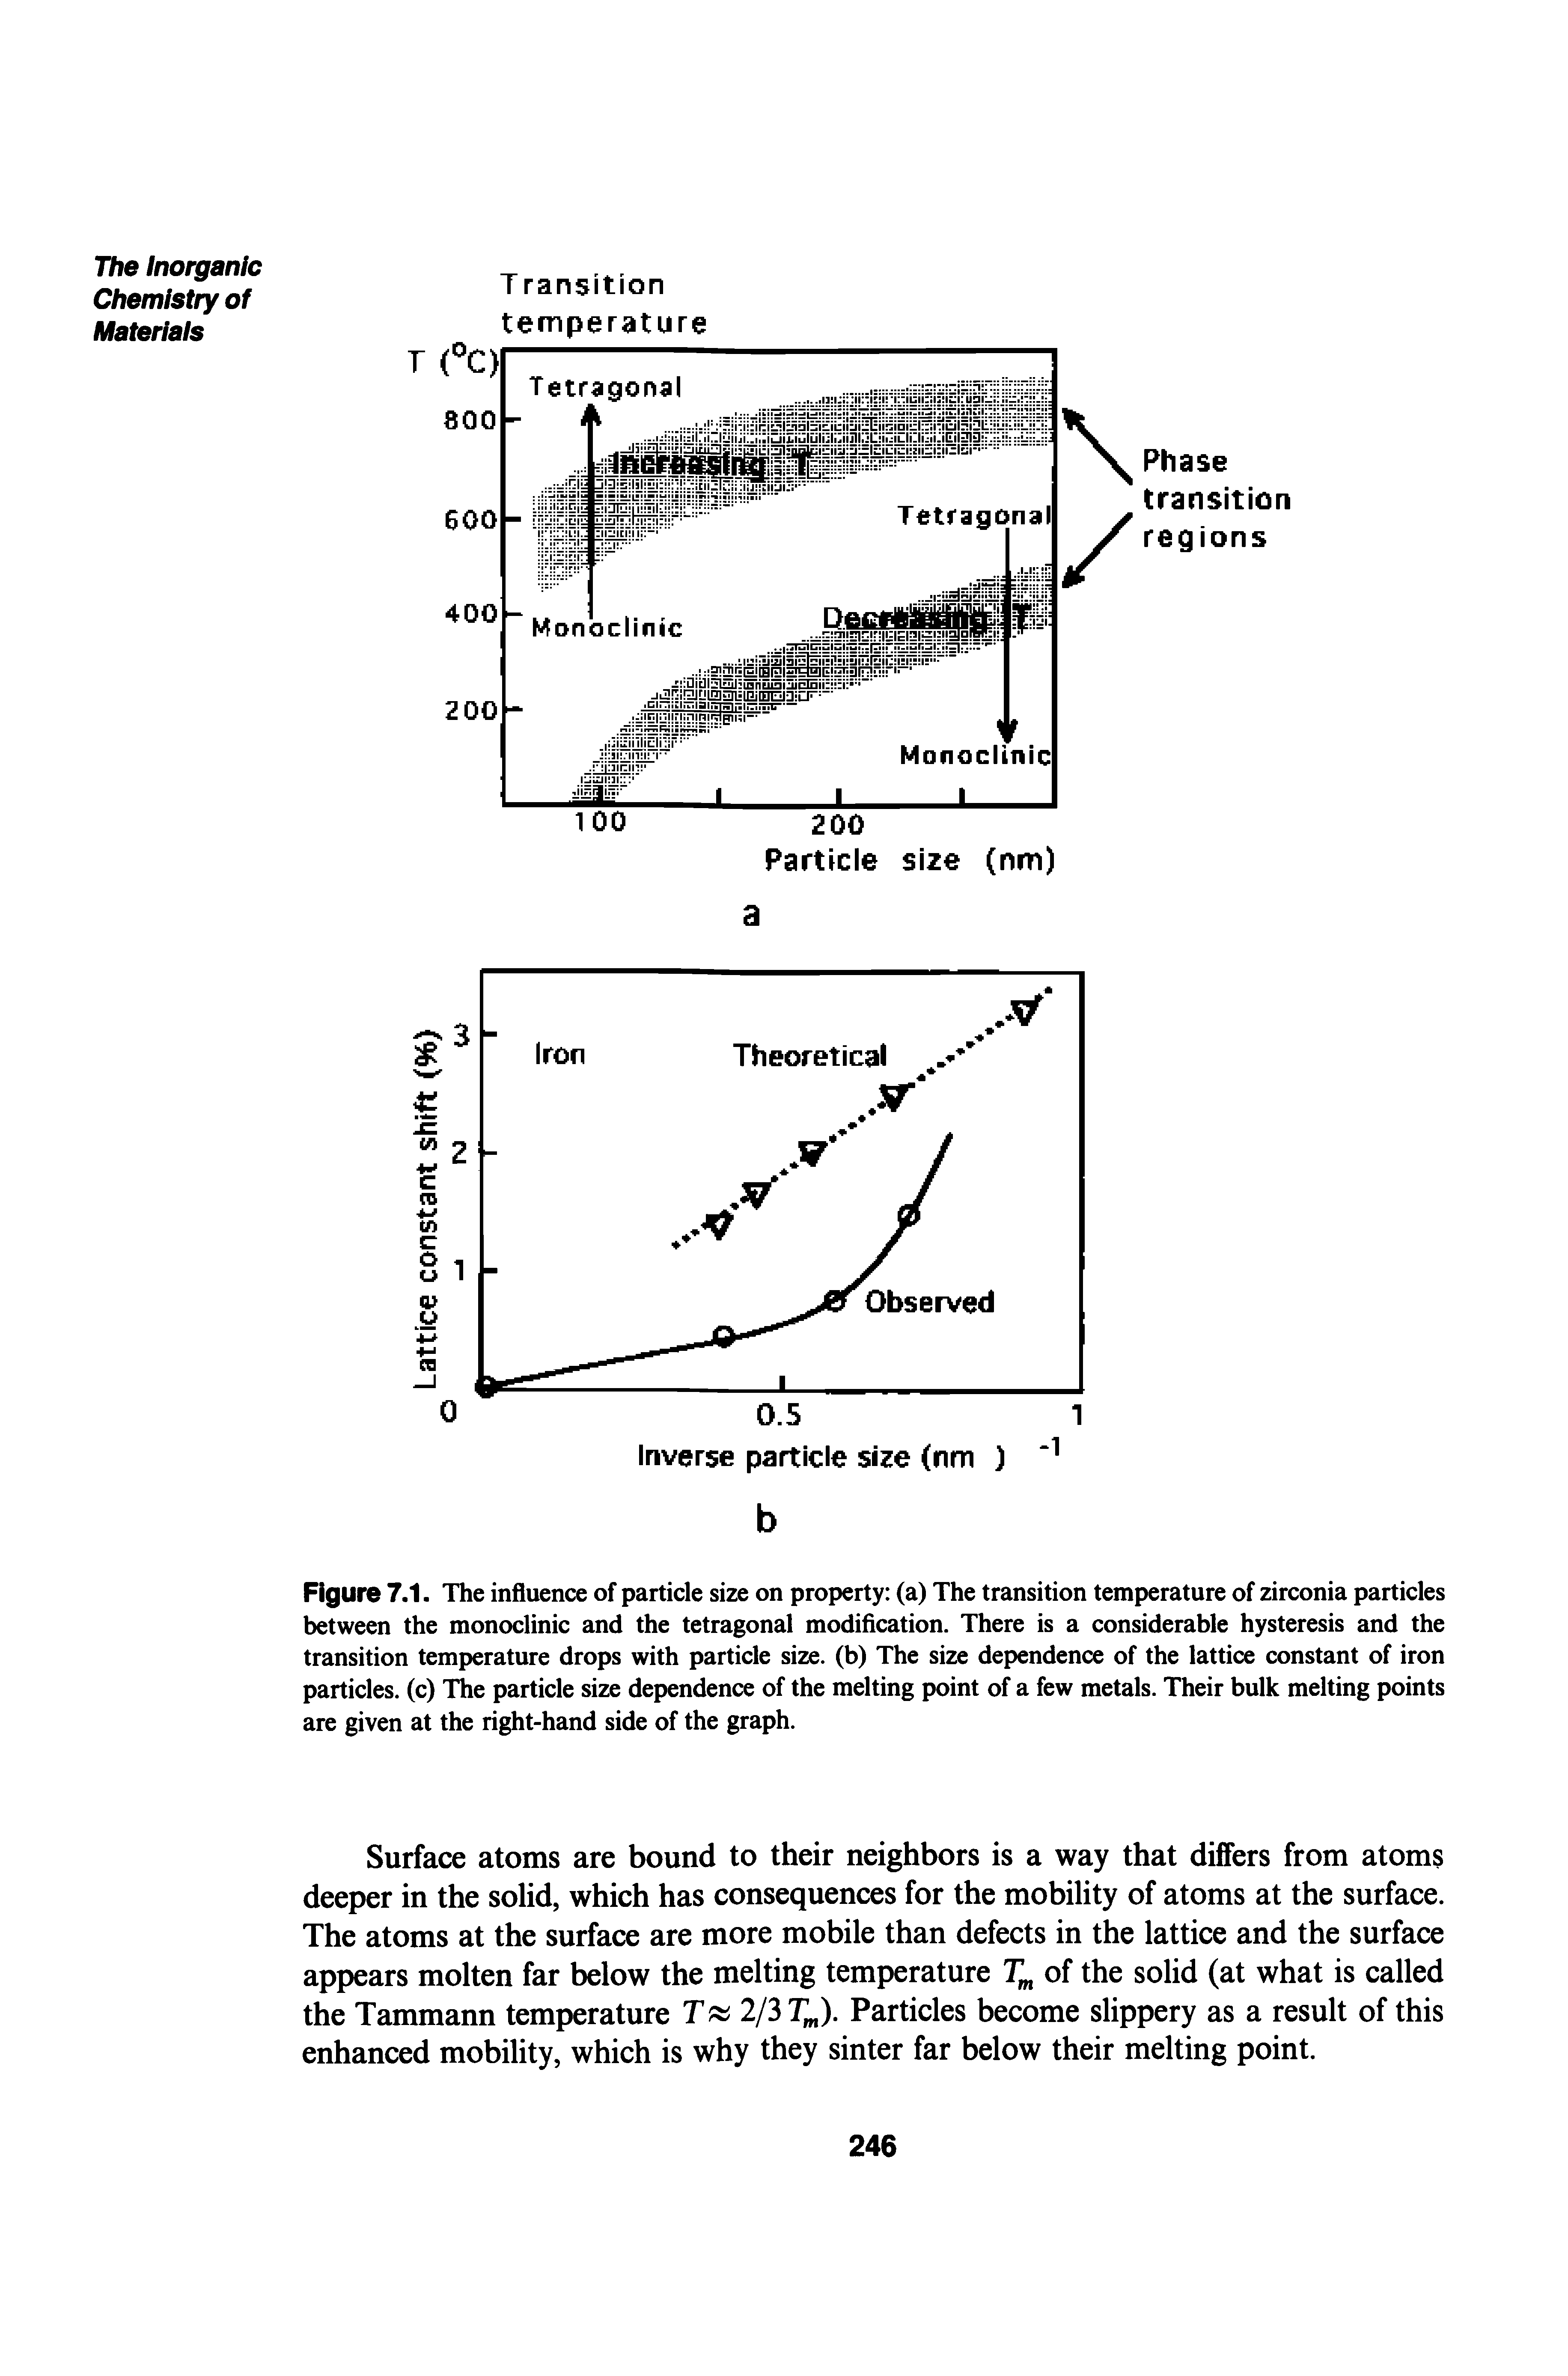 Figure 7.1. The influence of particle size on property (a) The transition temperature of zirconia particles between the monoclinic and the tetragonal modification. There is a considerable hysteresis and the transition temperature drops with particle size, (b) The size dependence of the lattice constant of iron particles, (c) The particle size dependence of the melting point of a few metals. Their bulk melting points are given at the right-hand side of the graph.